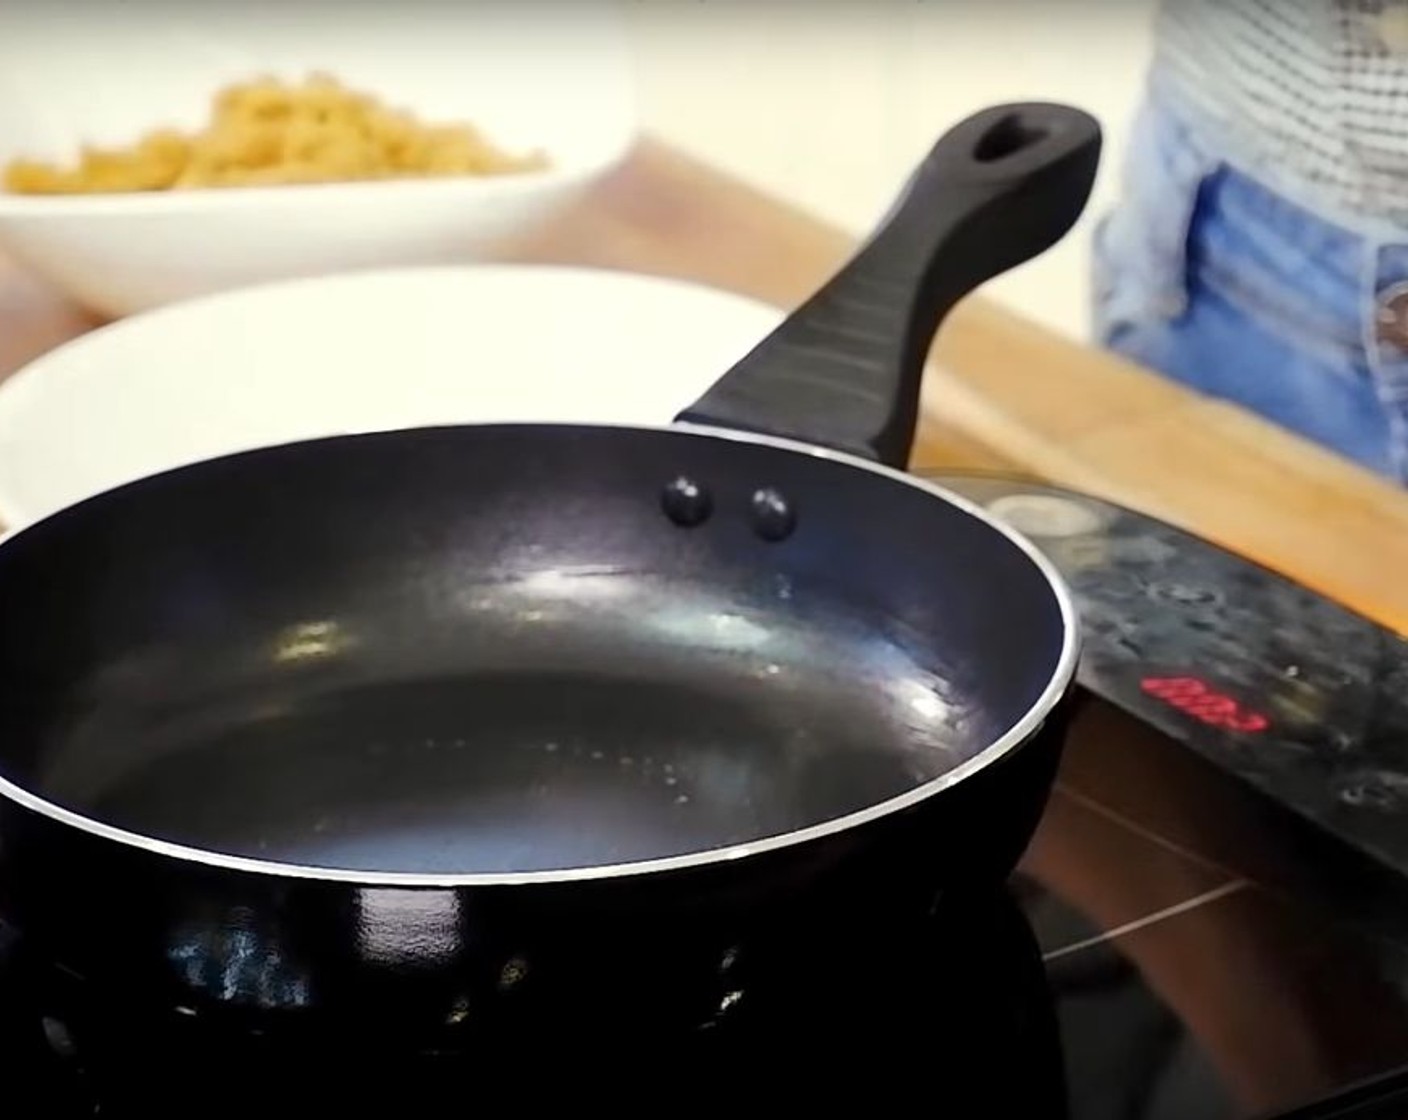 step 7 Lightly grease an 8-inch (20cm) frying pan and preheat it over medium low heat.